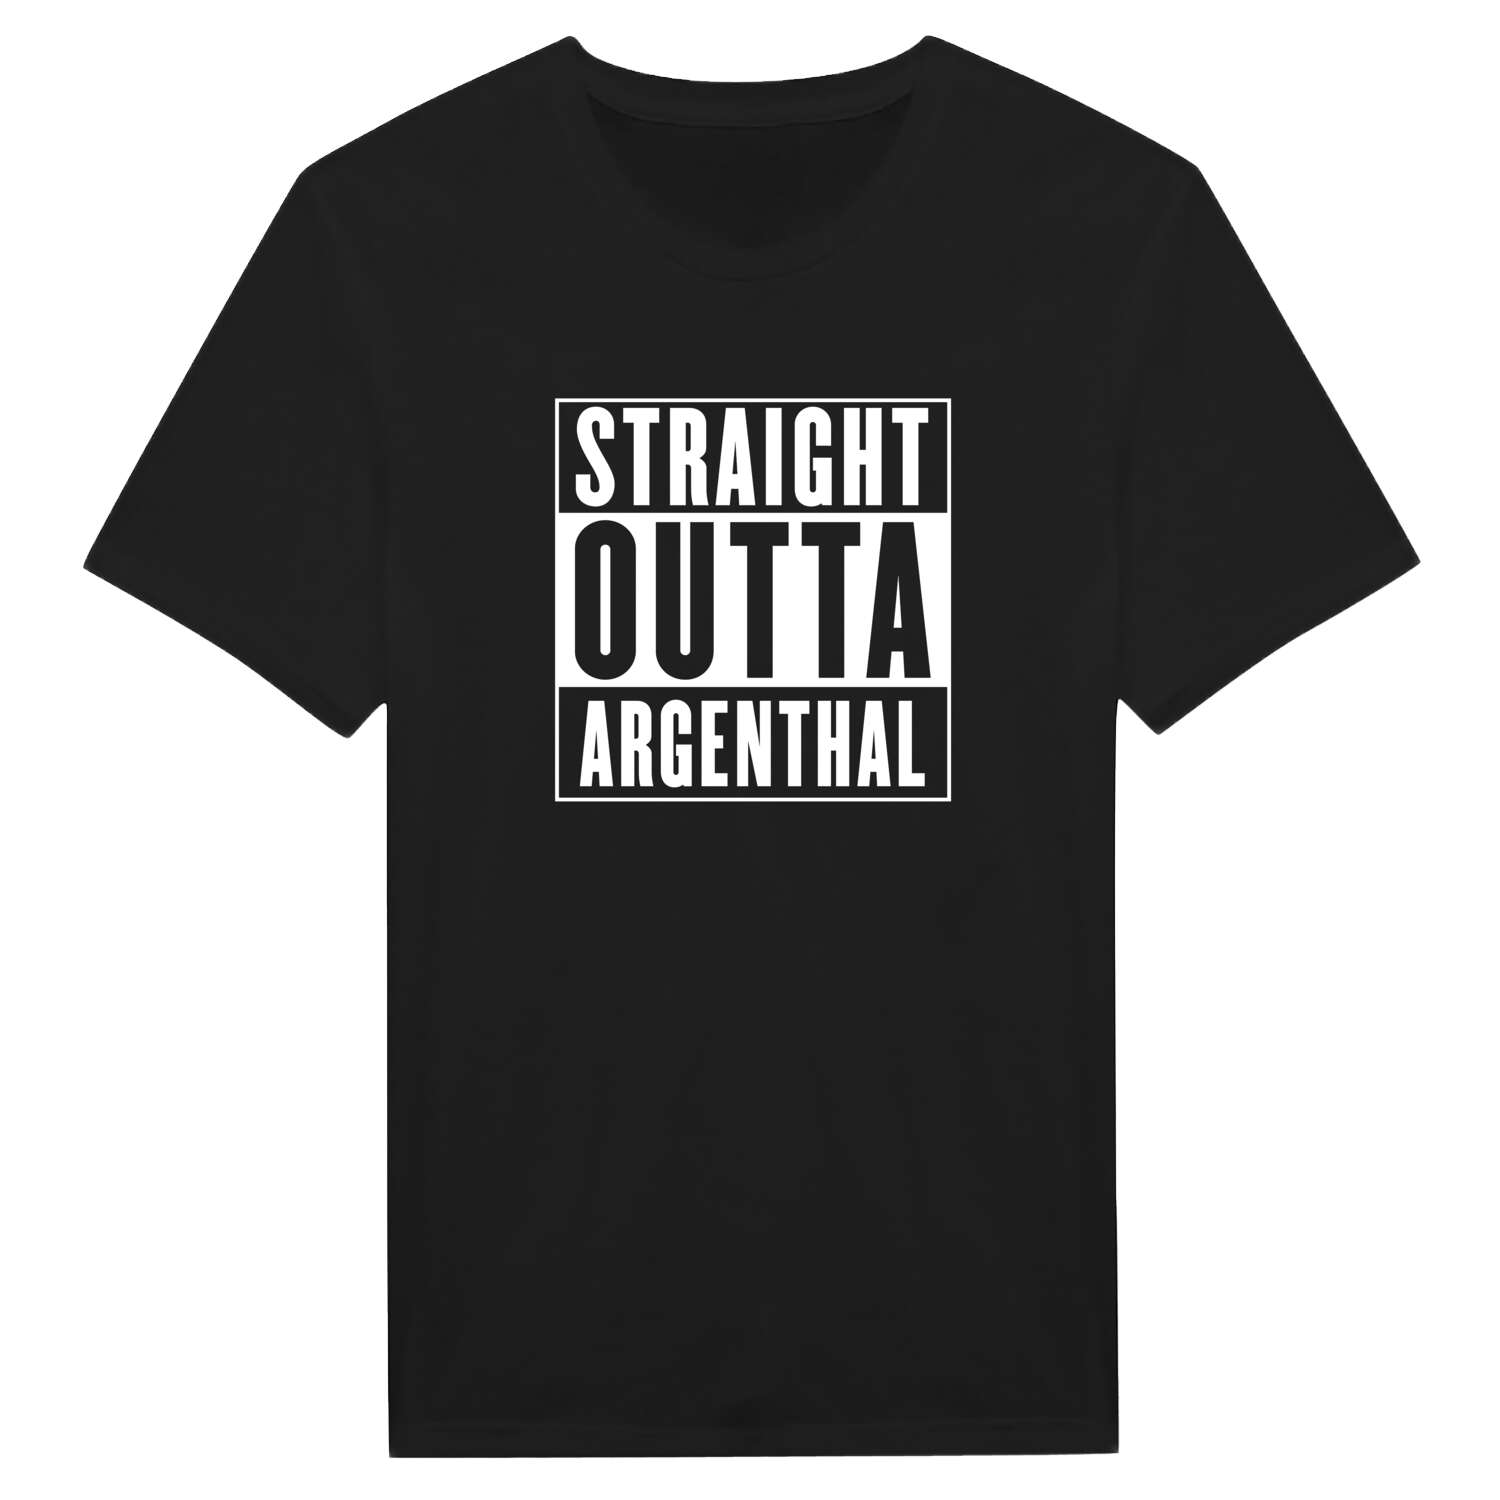 Argenthal T-Shirt »Straight Outta«